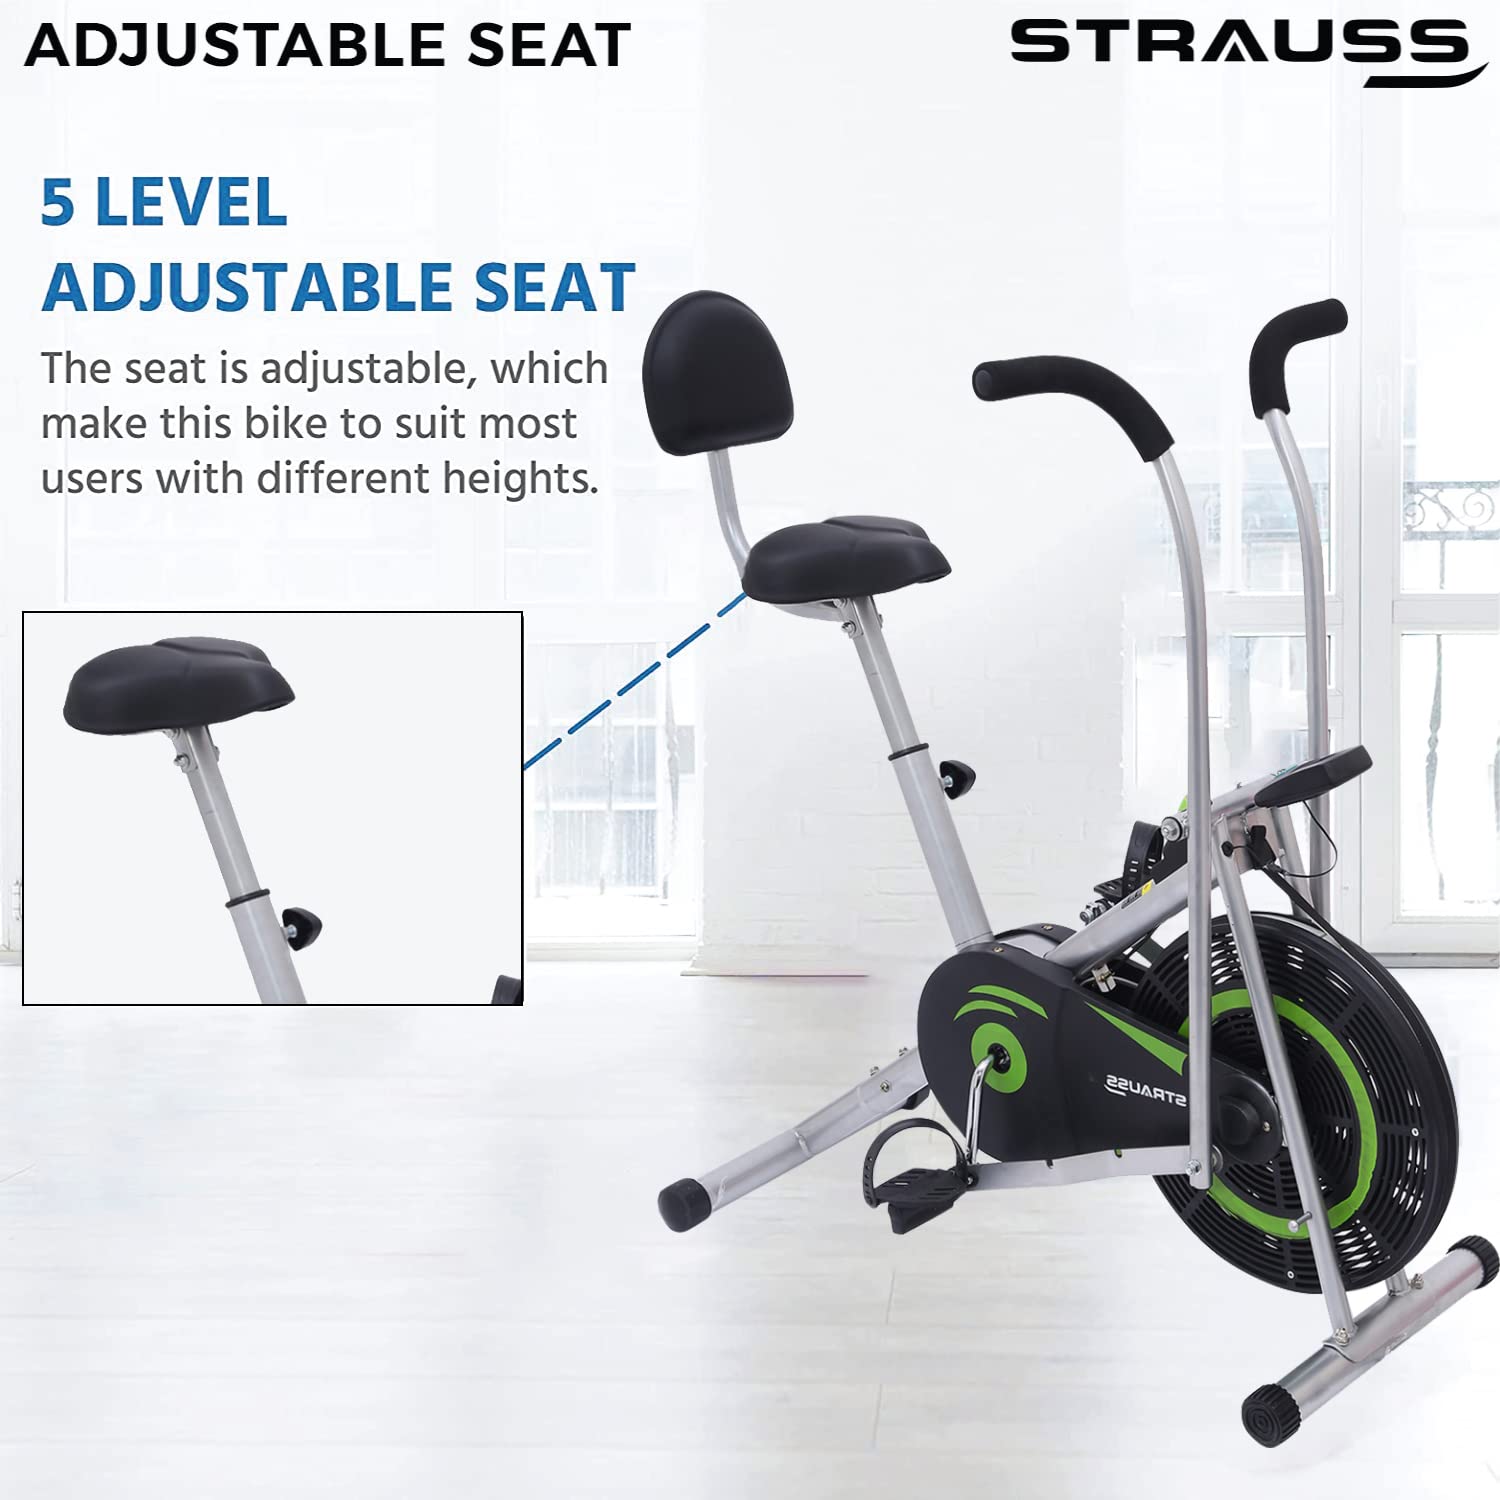 Strauss Air Bike Exercise Cycle with Moving or Stationary Handle | Side Handle for Support | Adjustable Resistance with Cushioned Seat | Fitness Cycle for Home Gym (Back Support, (Green))